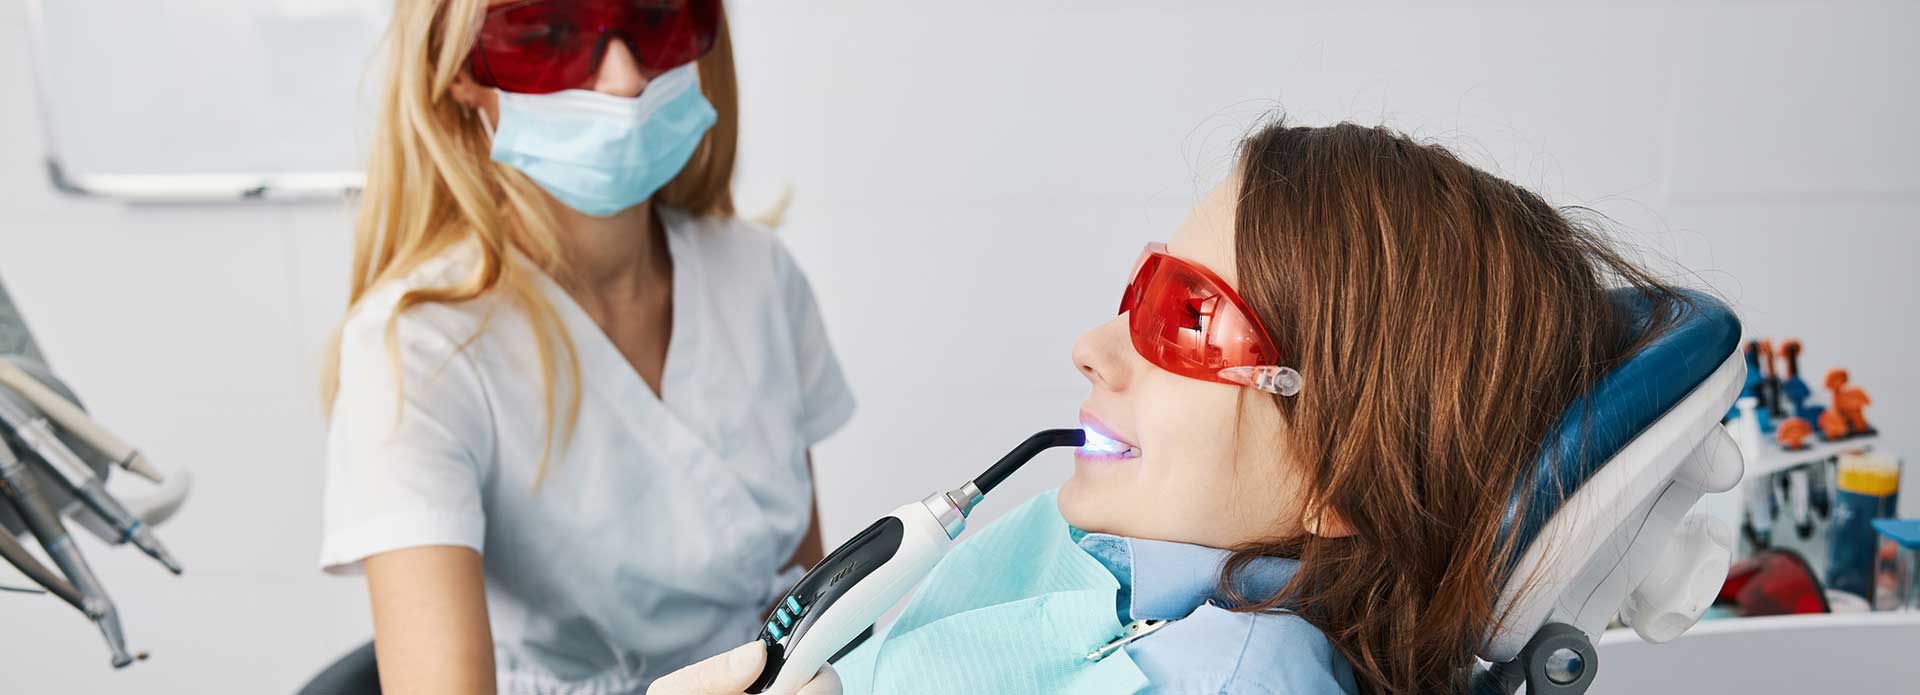 A patient getting dental sealant treatment at the dentist